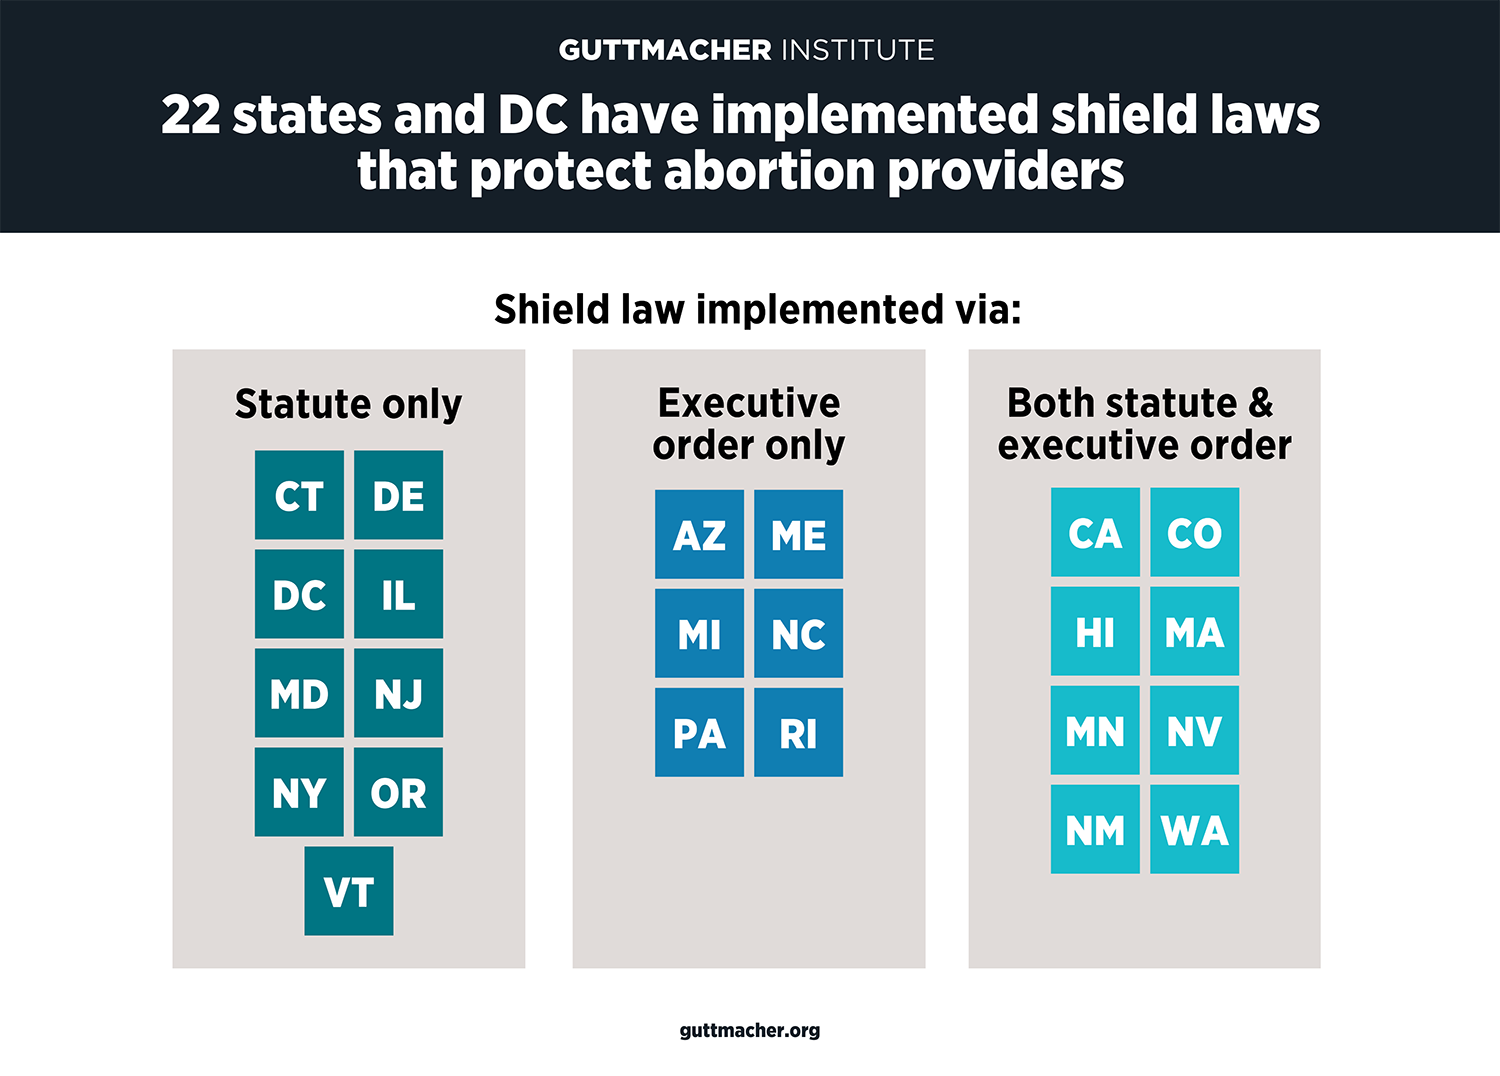 23 states and DC have implemented shield laws